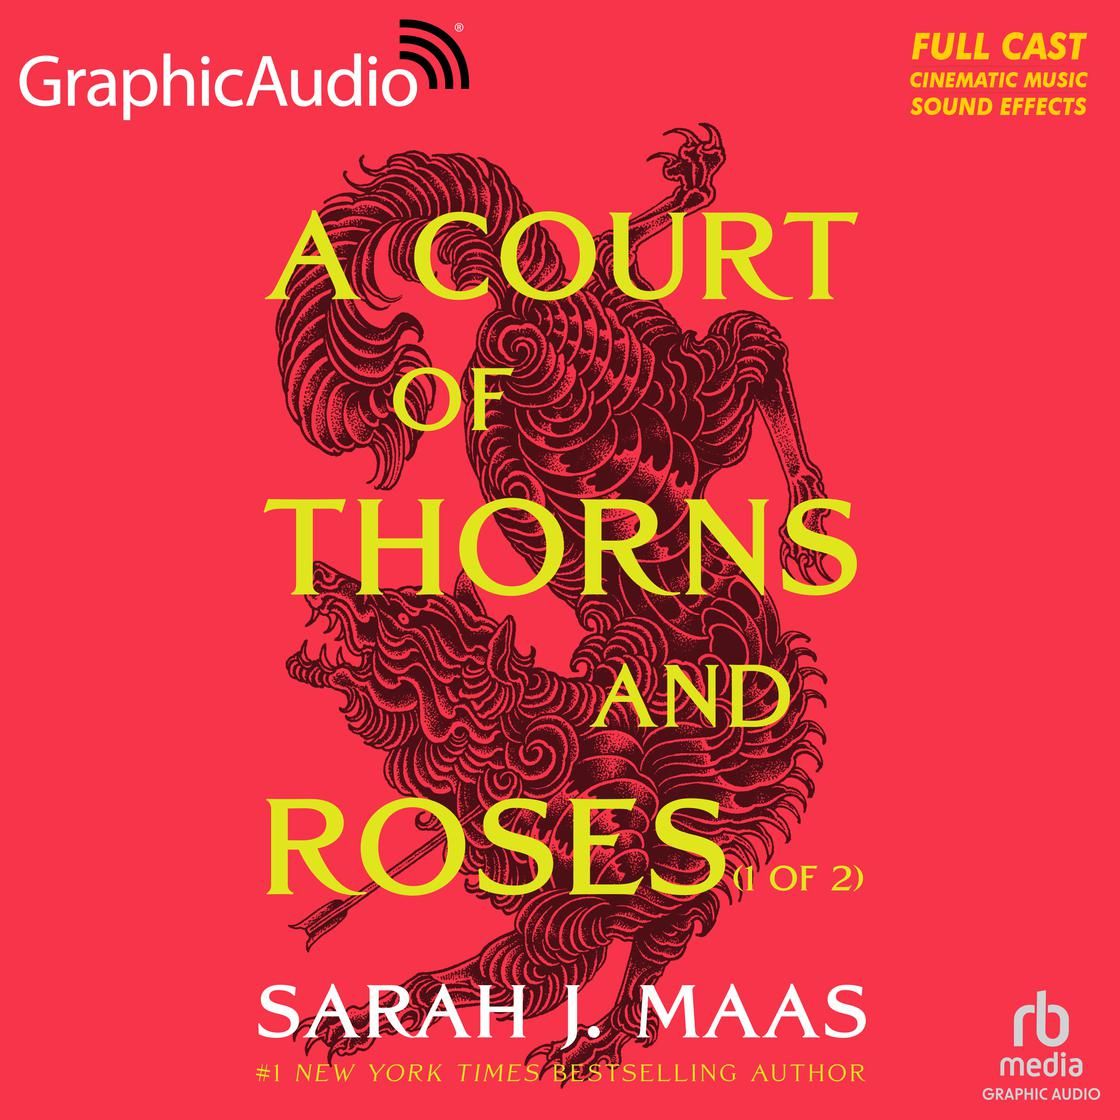 A Court of Thorns and Roses (1 of 2) [Dramatized Adaptation] | Libro.fm (US)